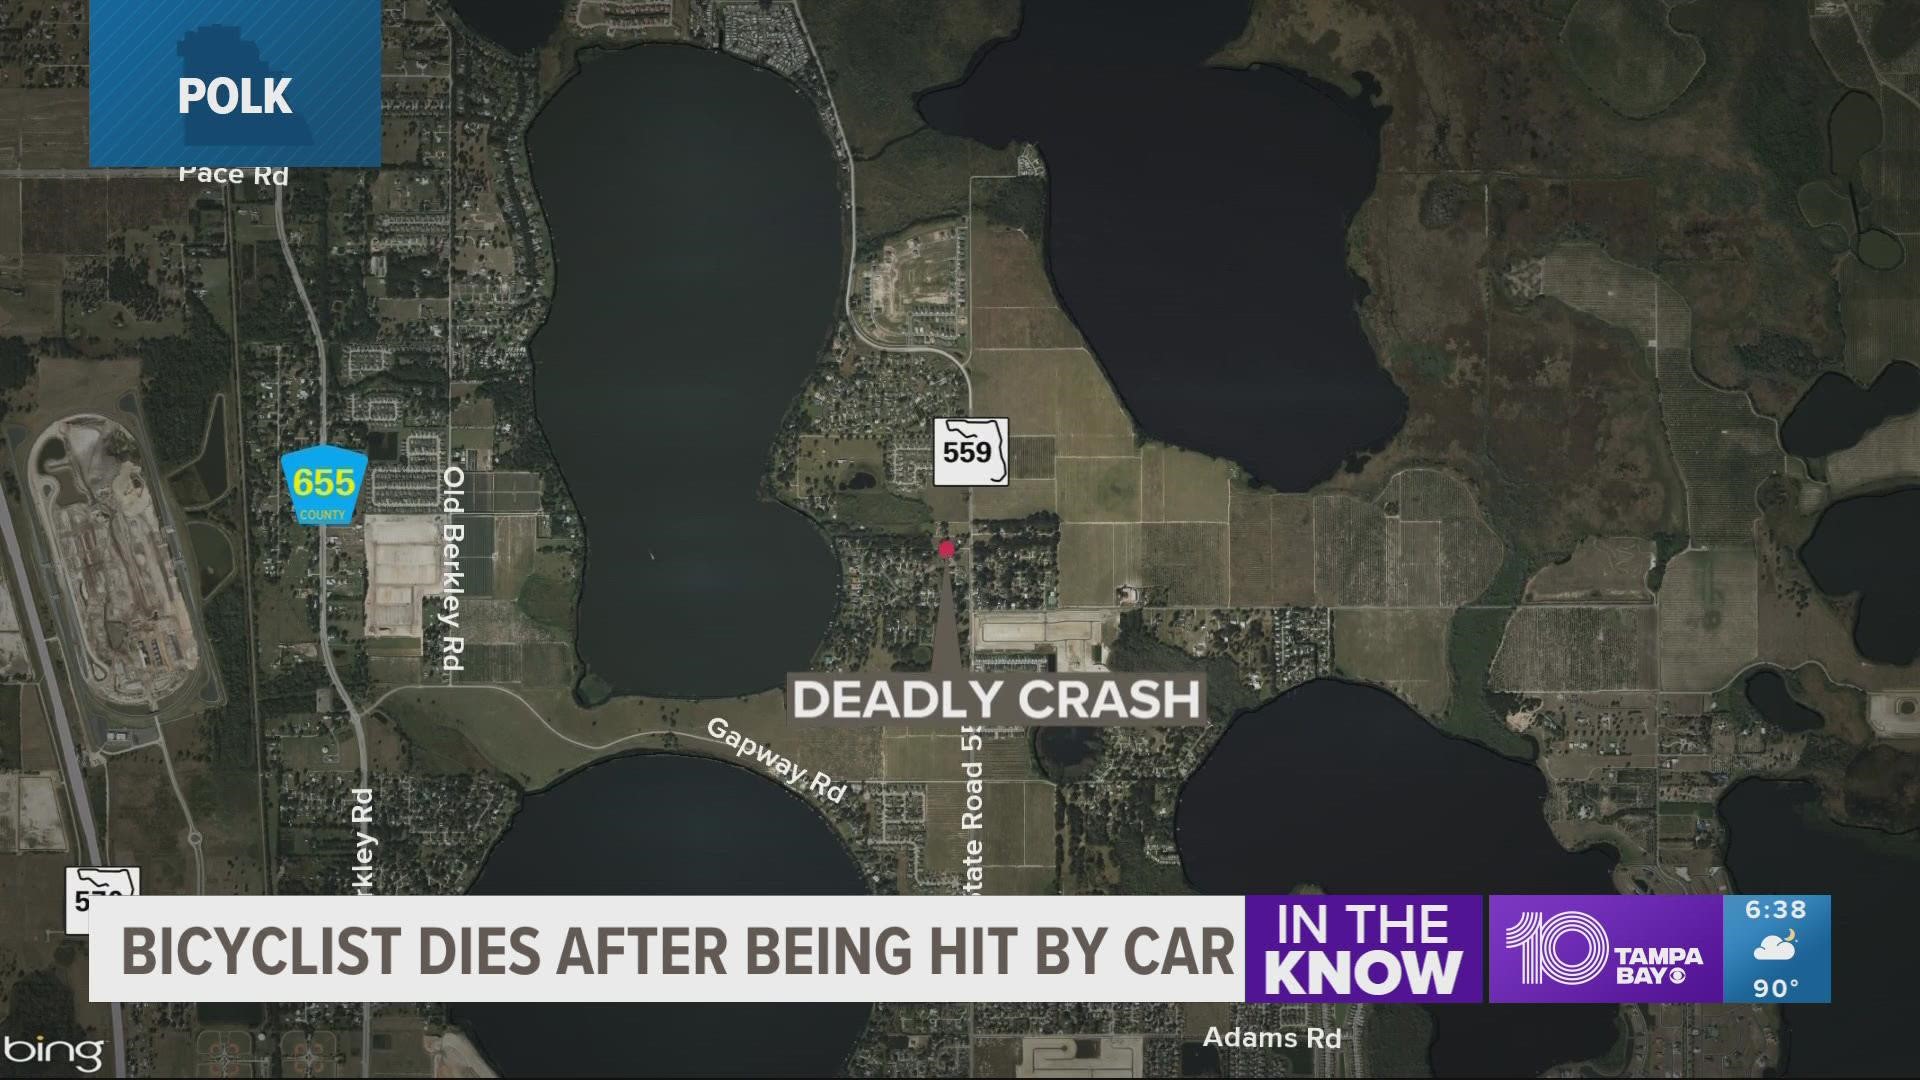 The 31-year-old man was reported dead when the crash occurred.